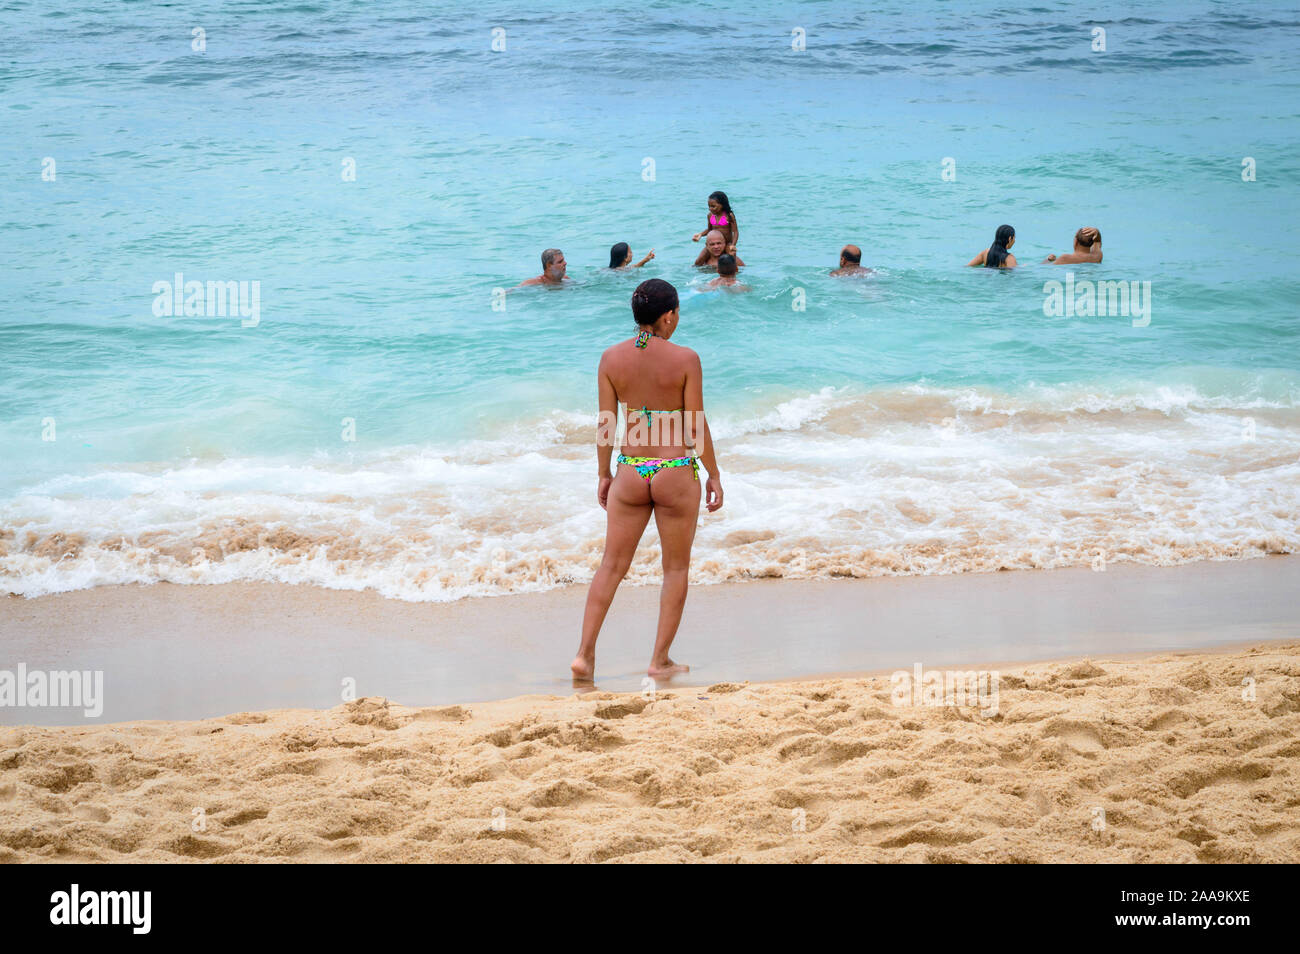 A Brazilian woman wearing a small bikini stands by the water watching the people who are bathing in the ocean. Stock Photo